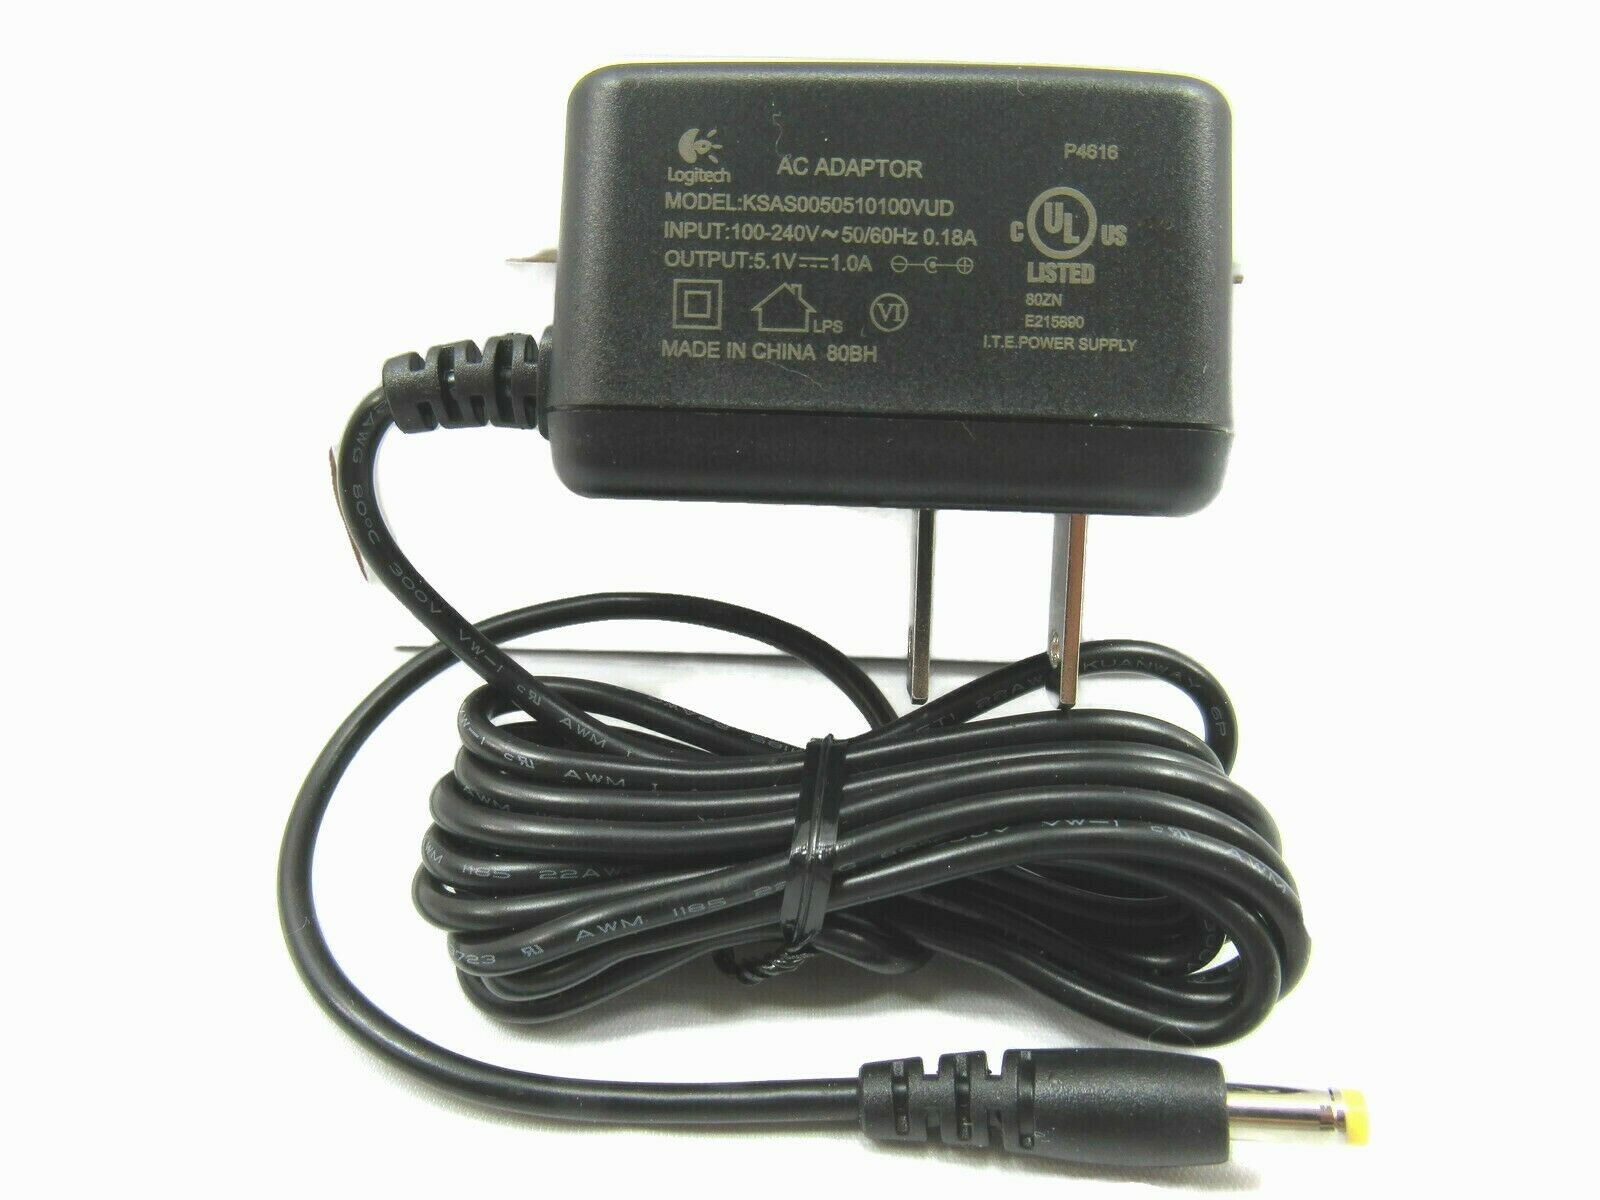 Logitech KSAS0050510100VUD AC Adapter Power Supply Cord Cable Charger Genuine Original